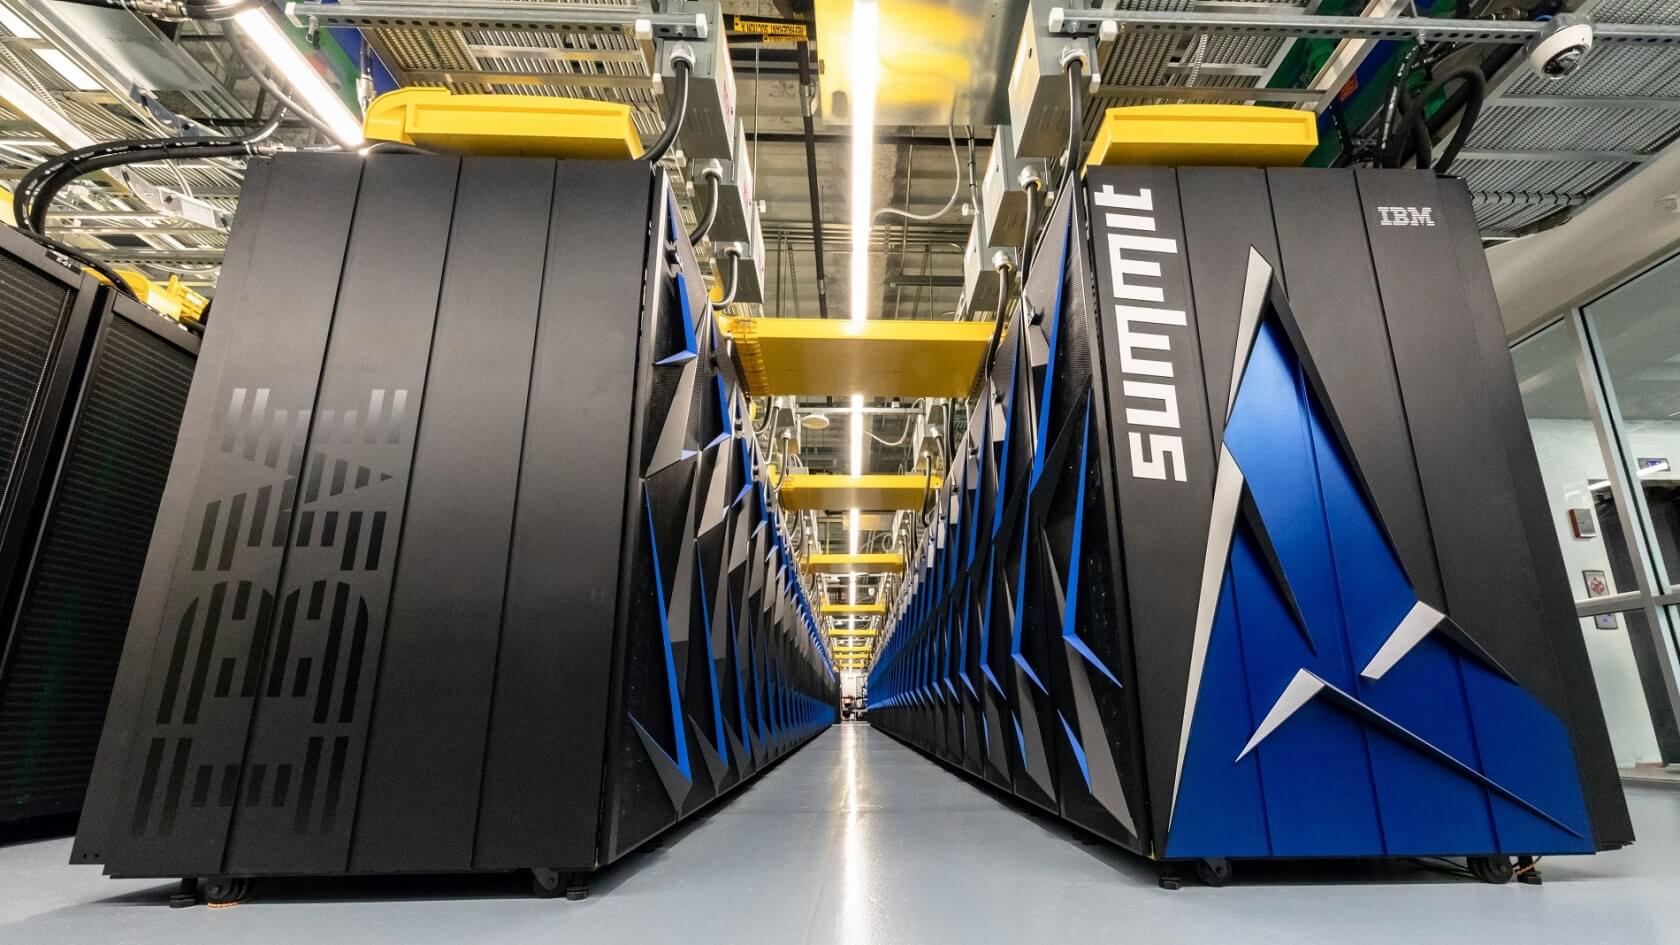 The US now officially has the world's fastest supercomputer, knocking China off the top spot